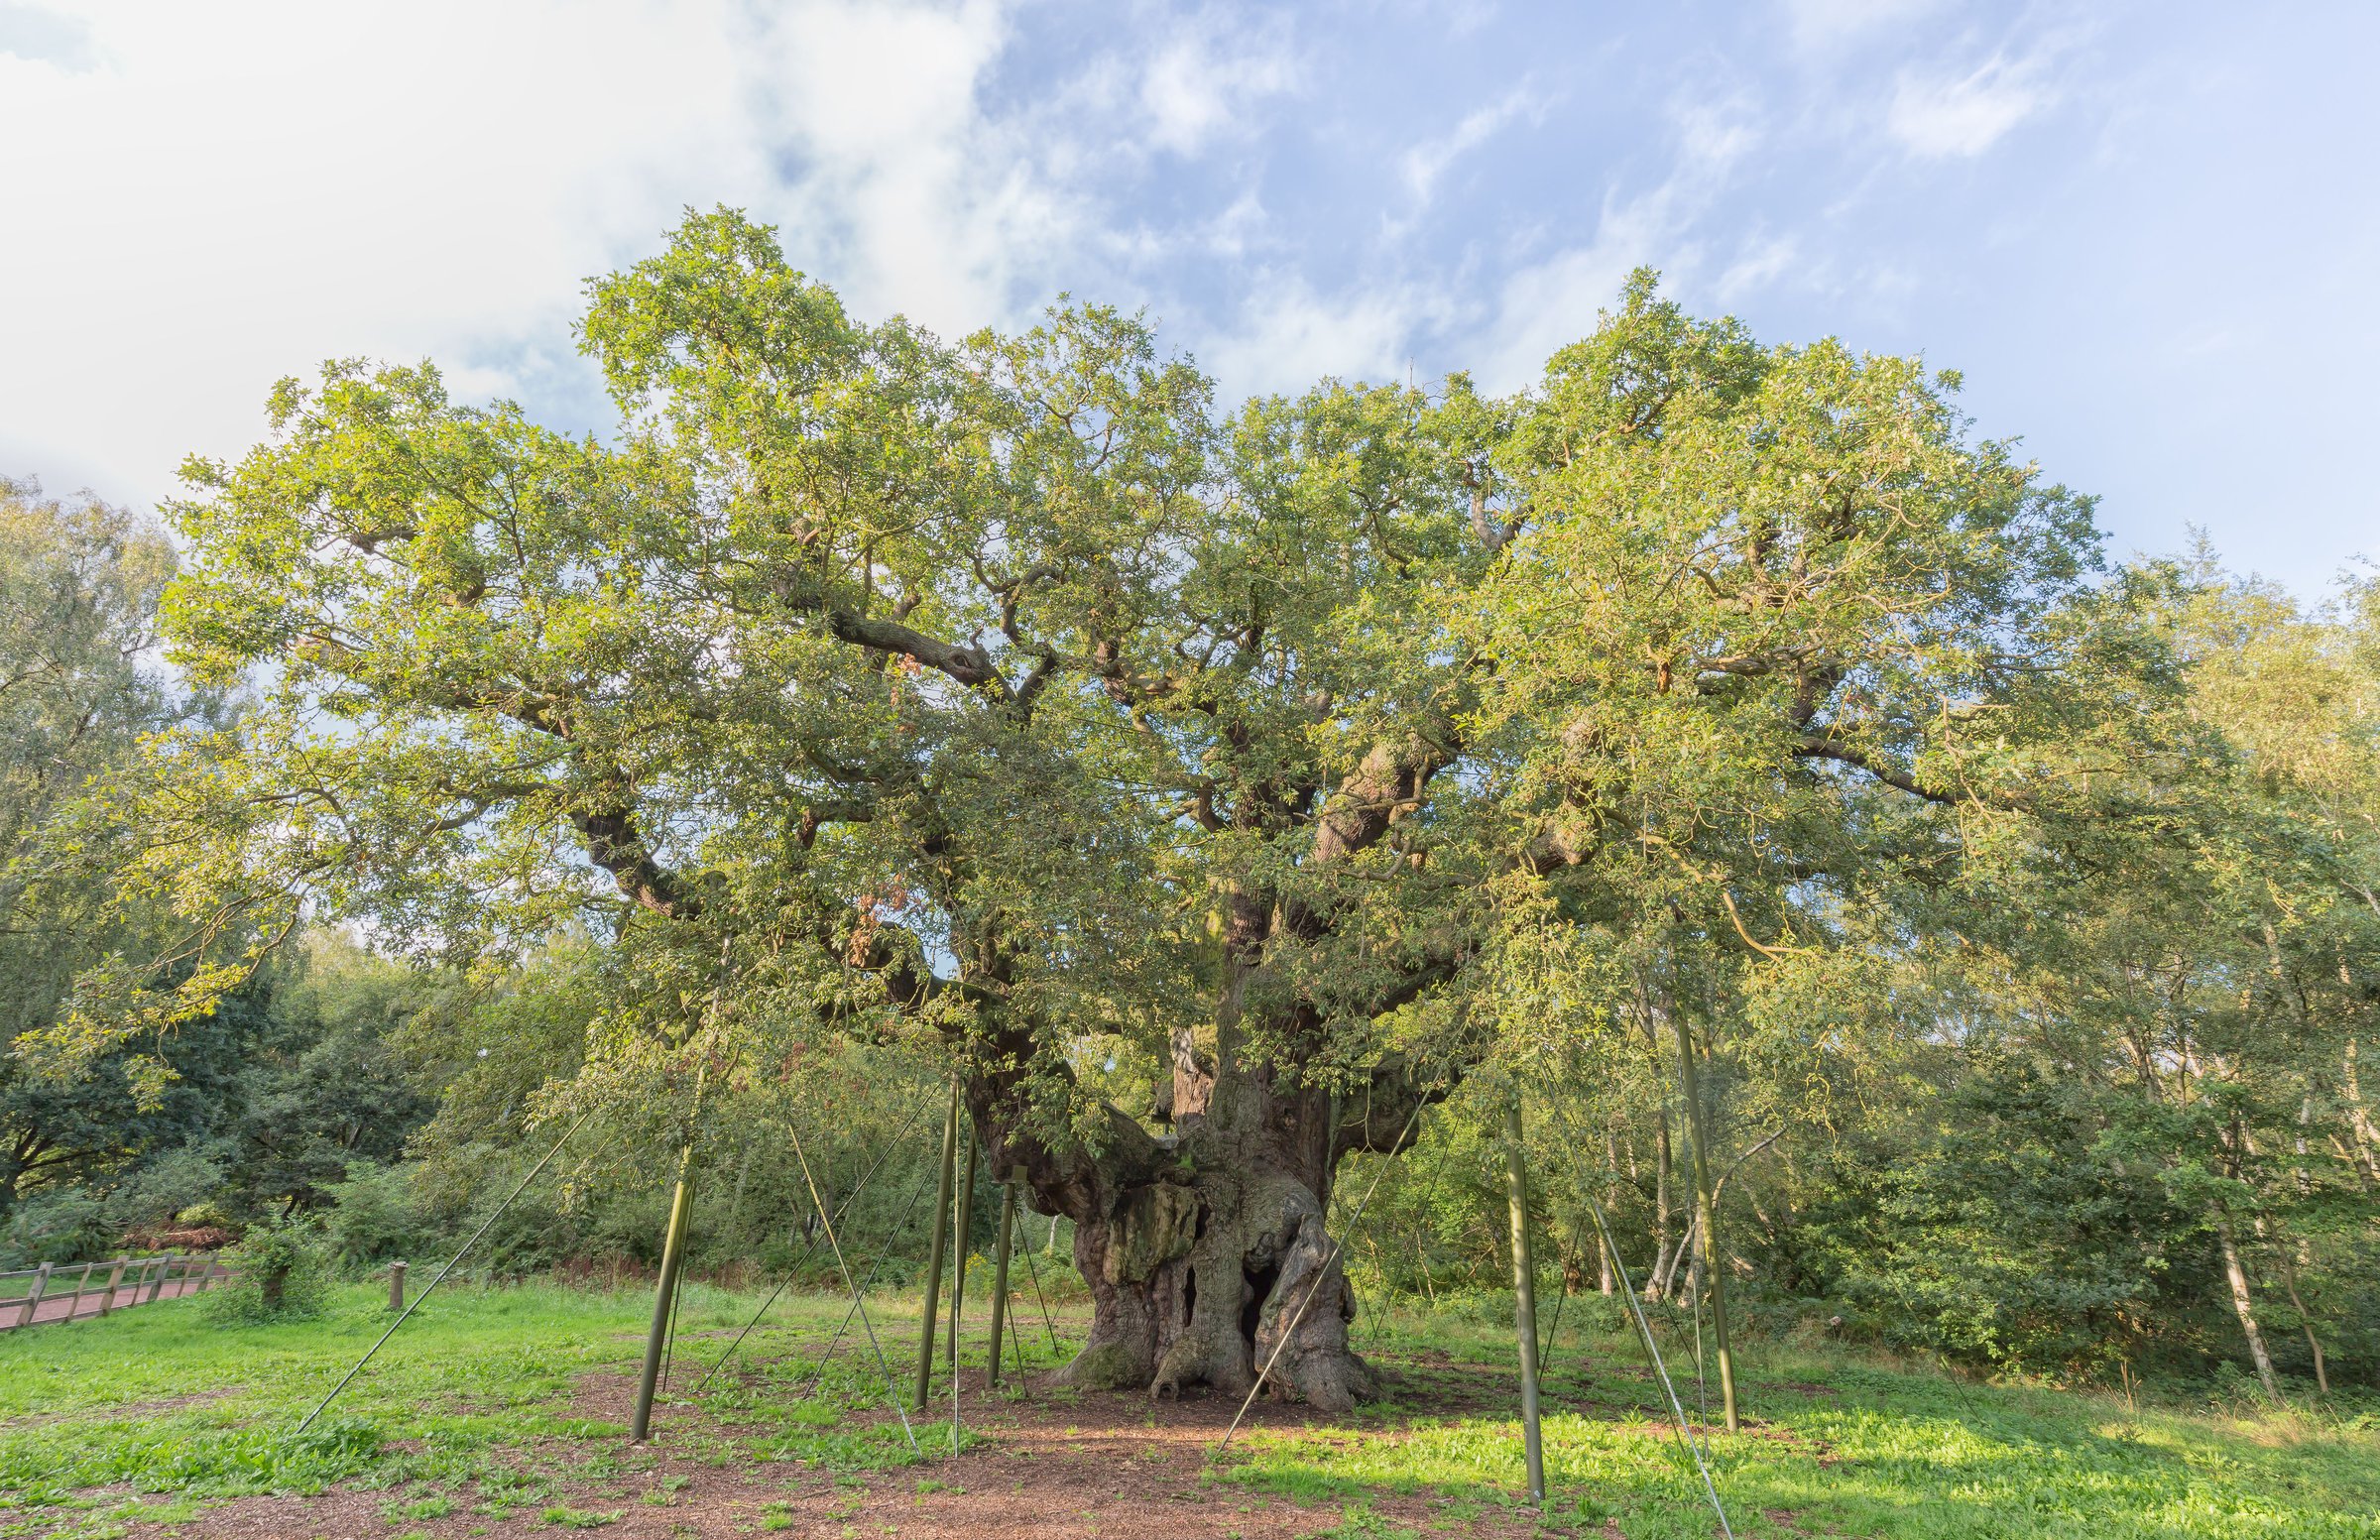 What's nearby at Sherwood Forest, Nottinghamshire